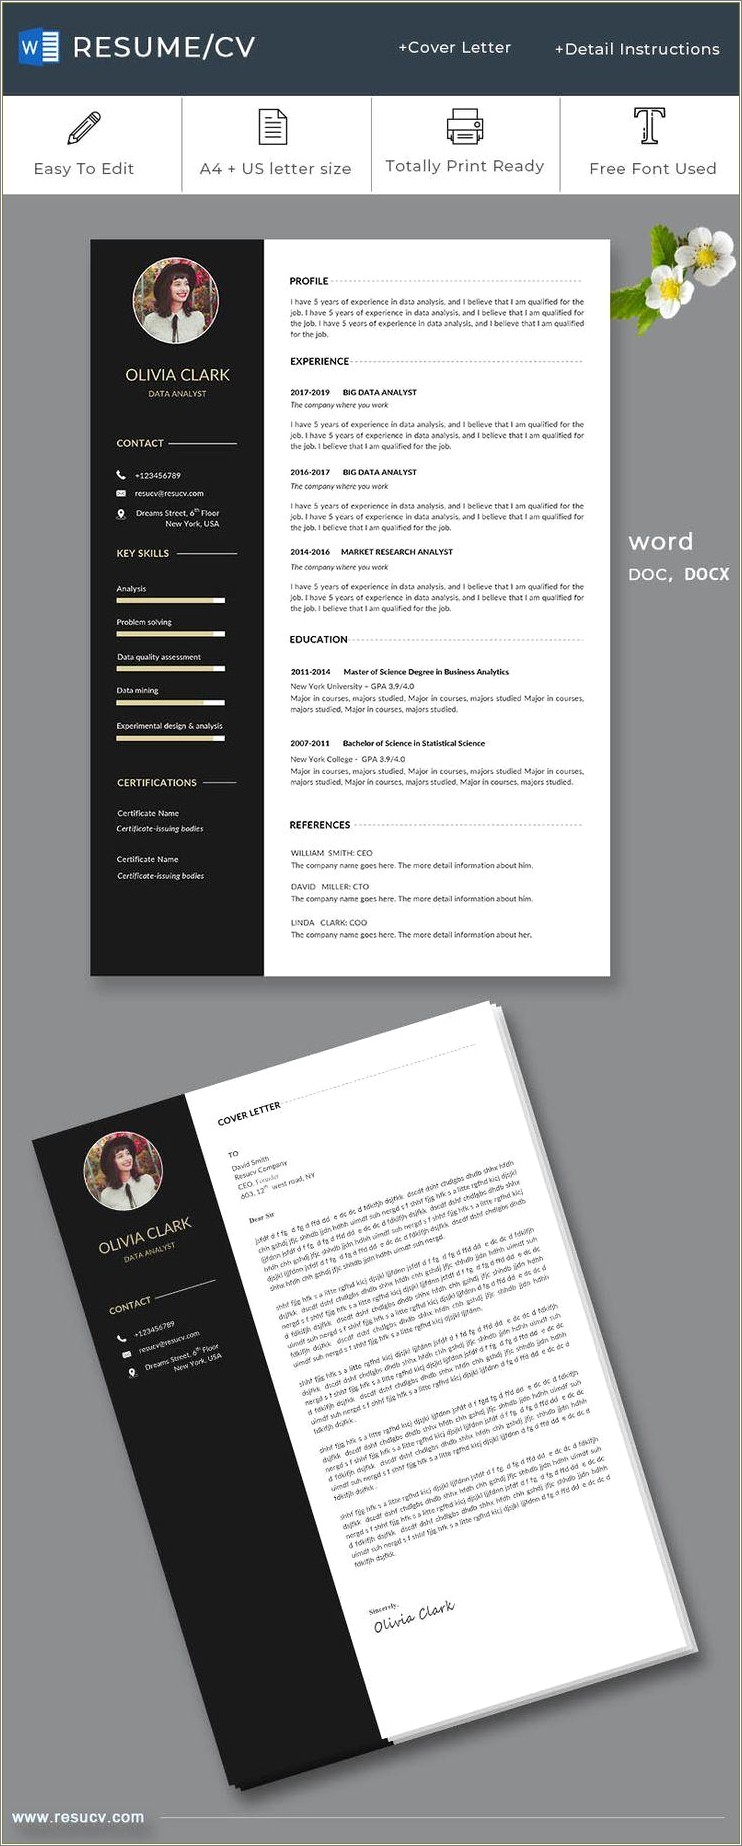 Data Analyst Resume Template Ms Word